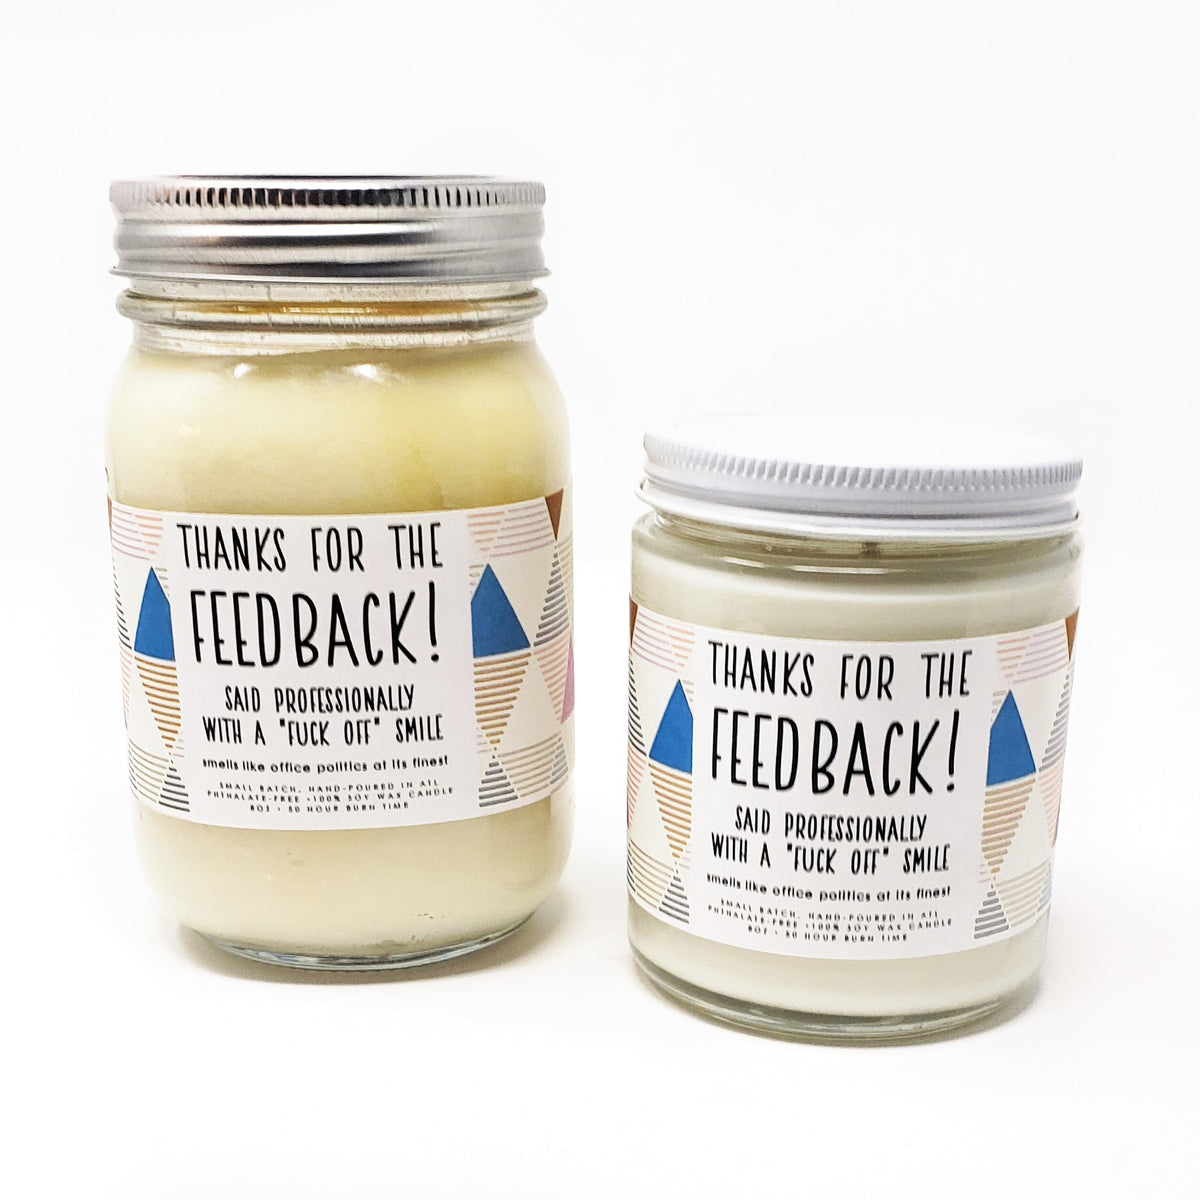 Thanks for the Feedback Candle - 8oz